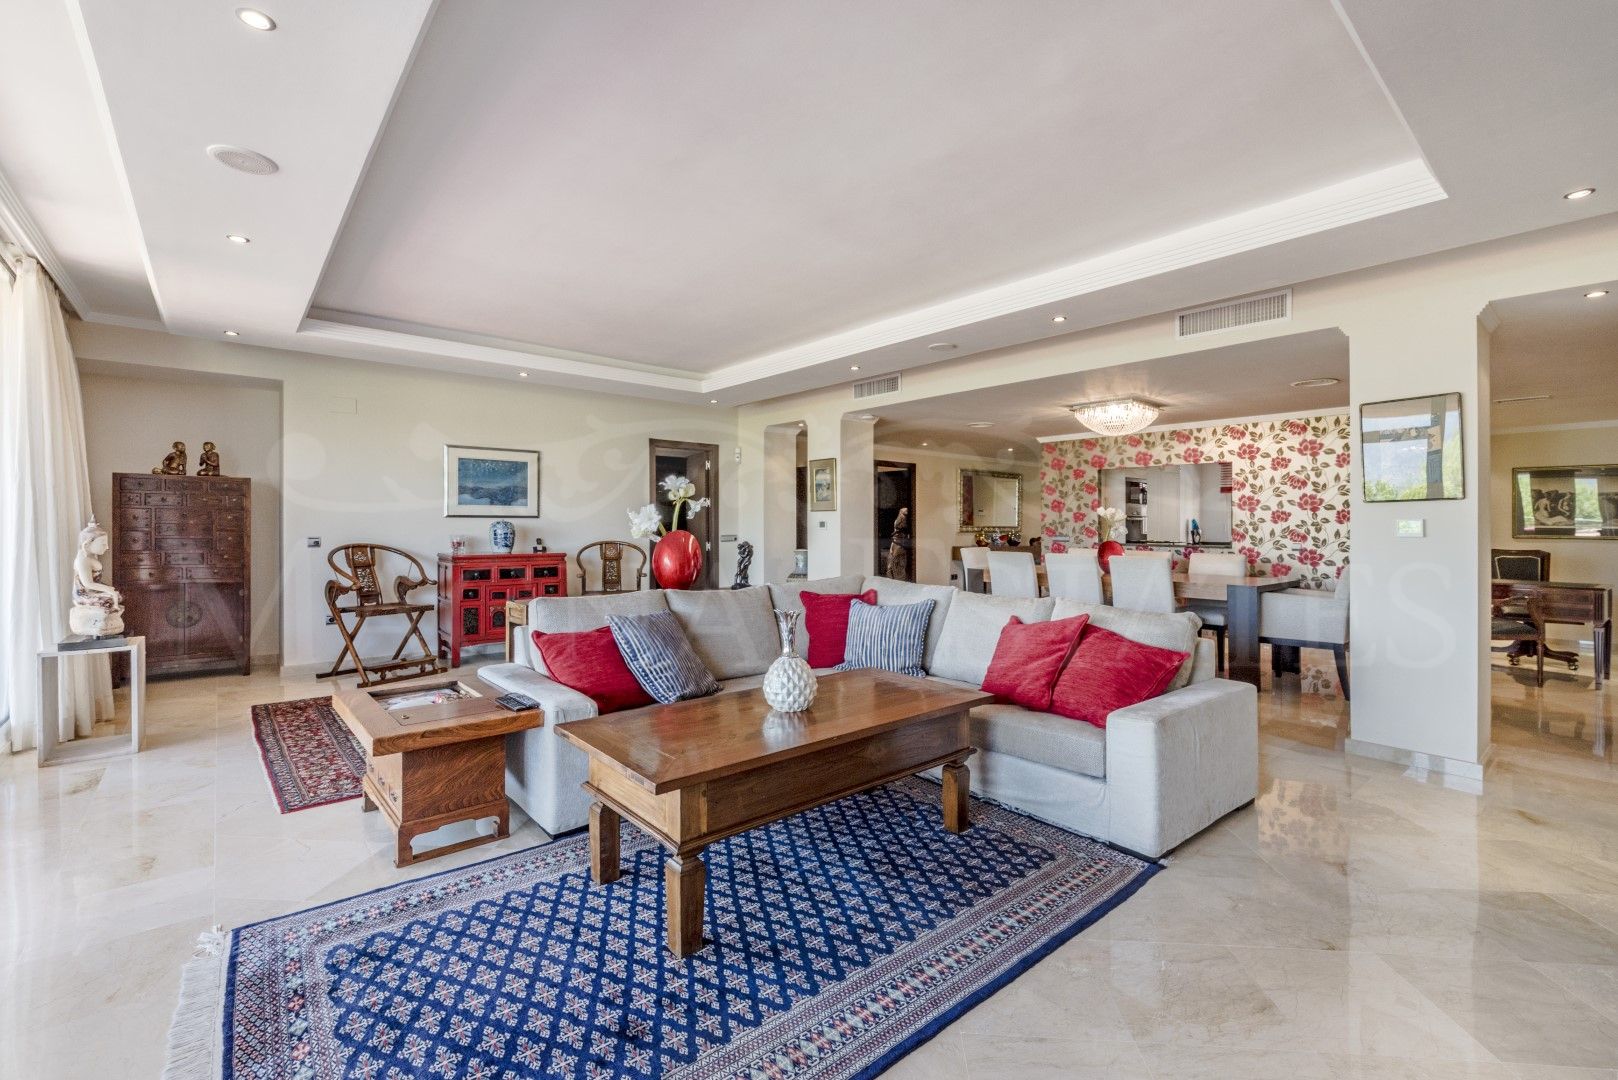 Splendid stylish apartment with 4 bedrooms in Magna Marbella, Nueva Andalucía.